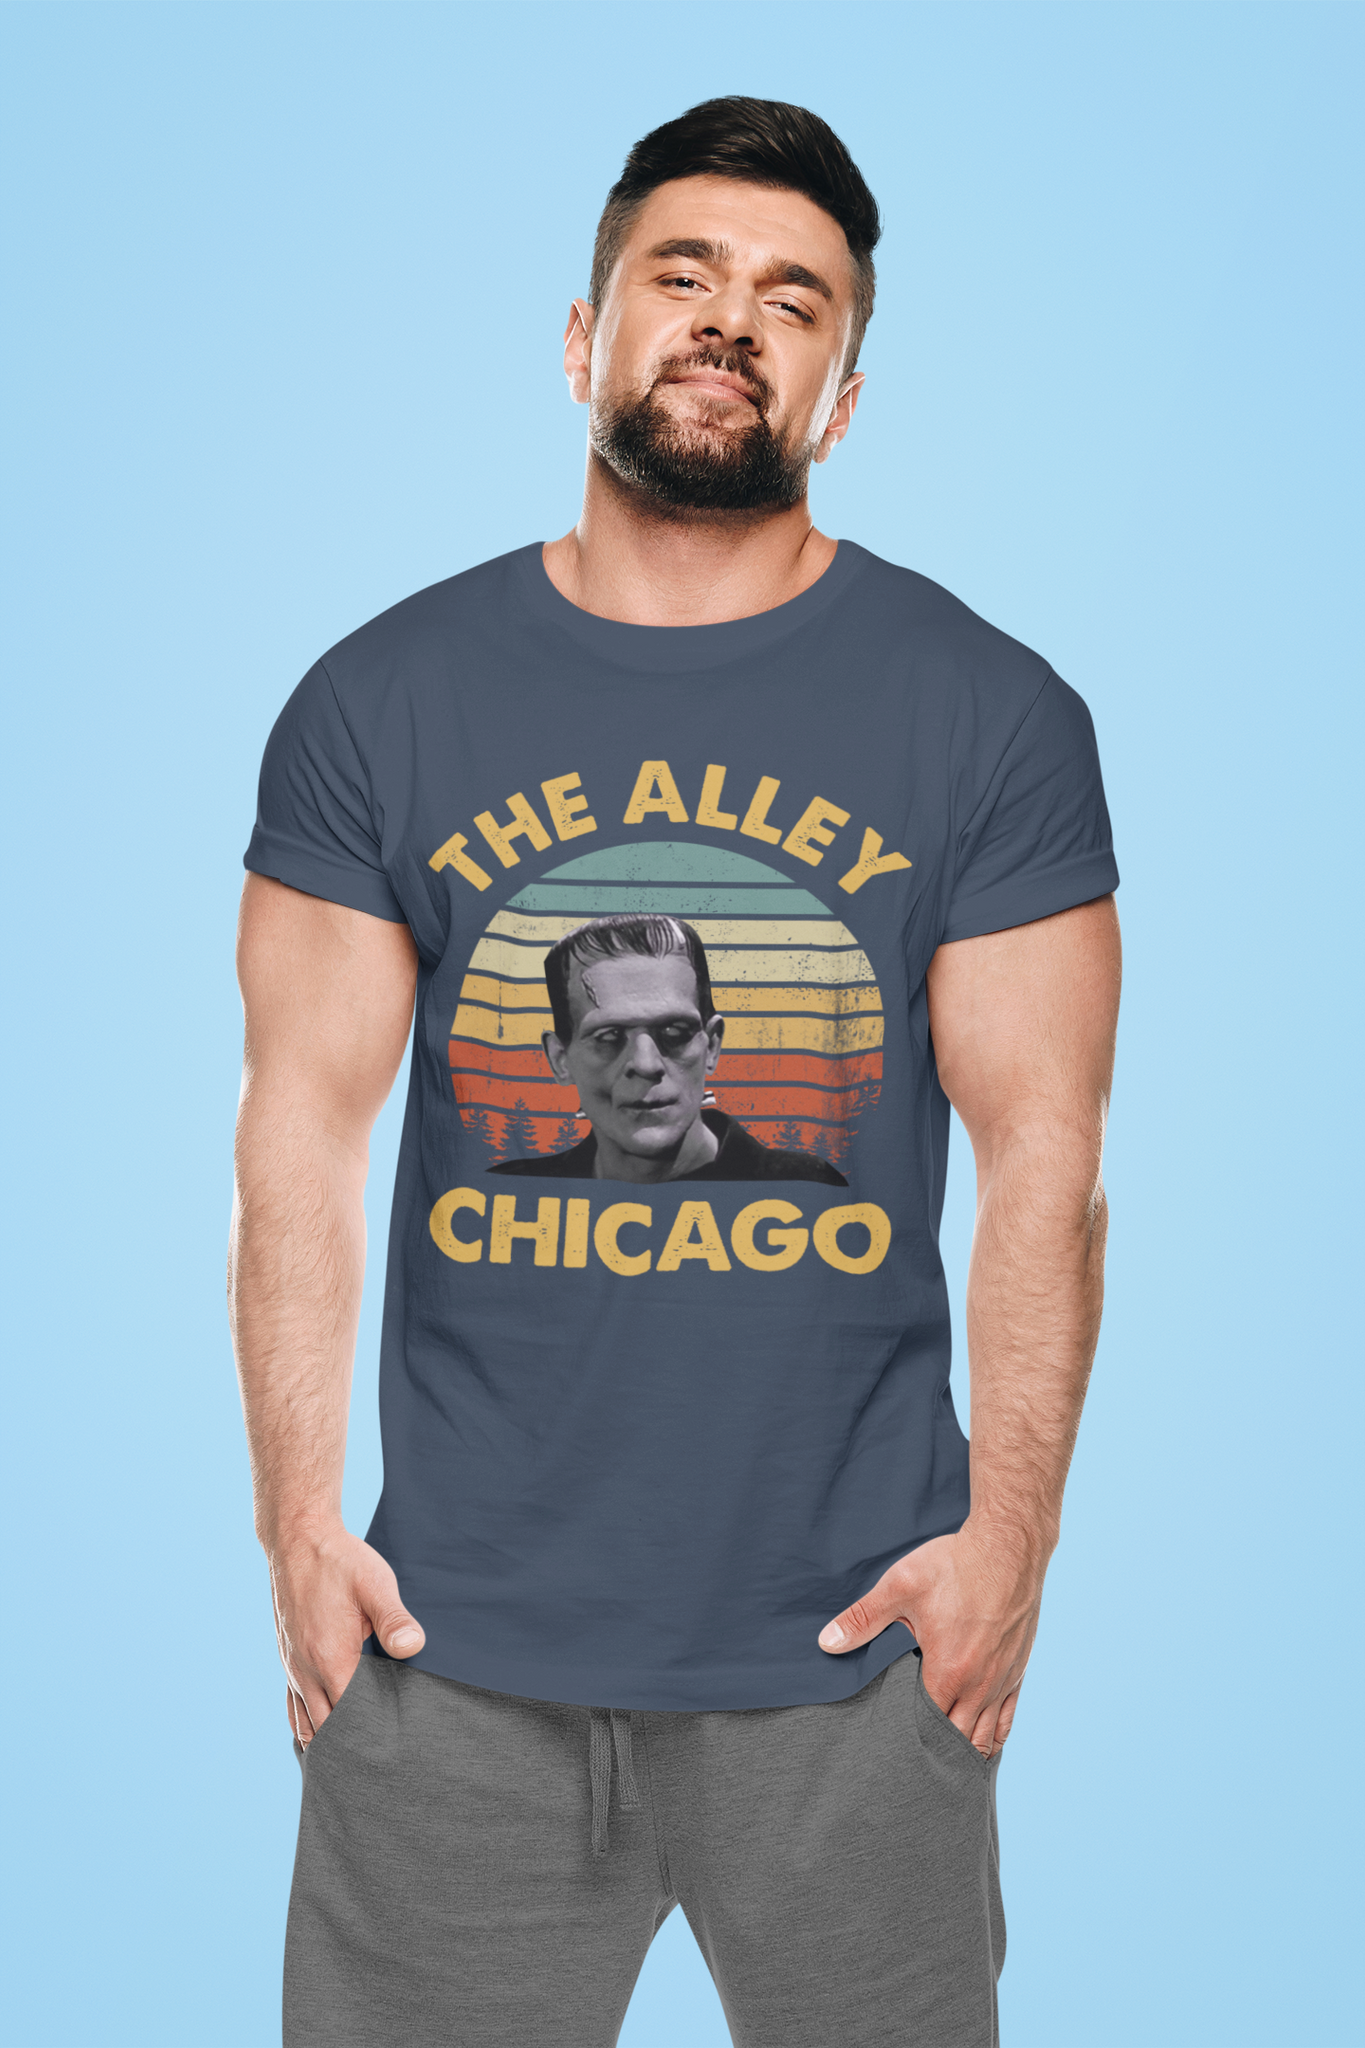 Frankenstein Vintage T Shirt, The Alley Chicago Tshirt, The Monster T Shirt, Halloween Gifts